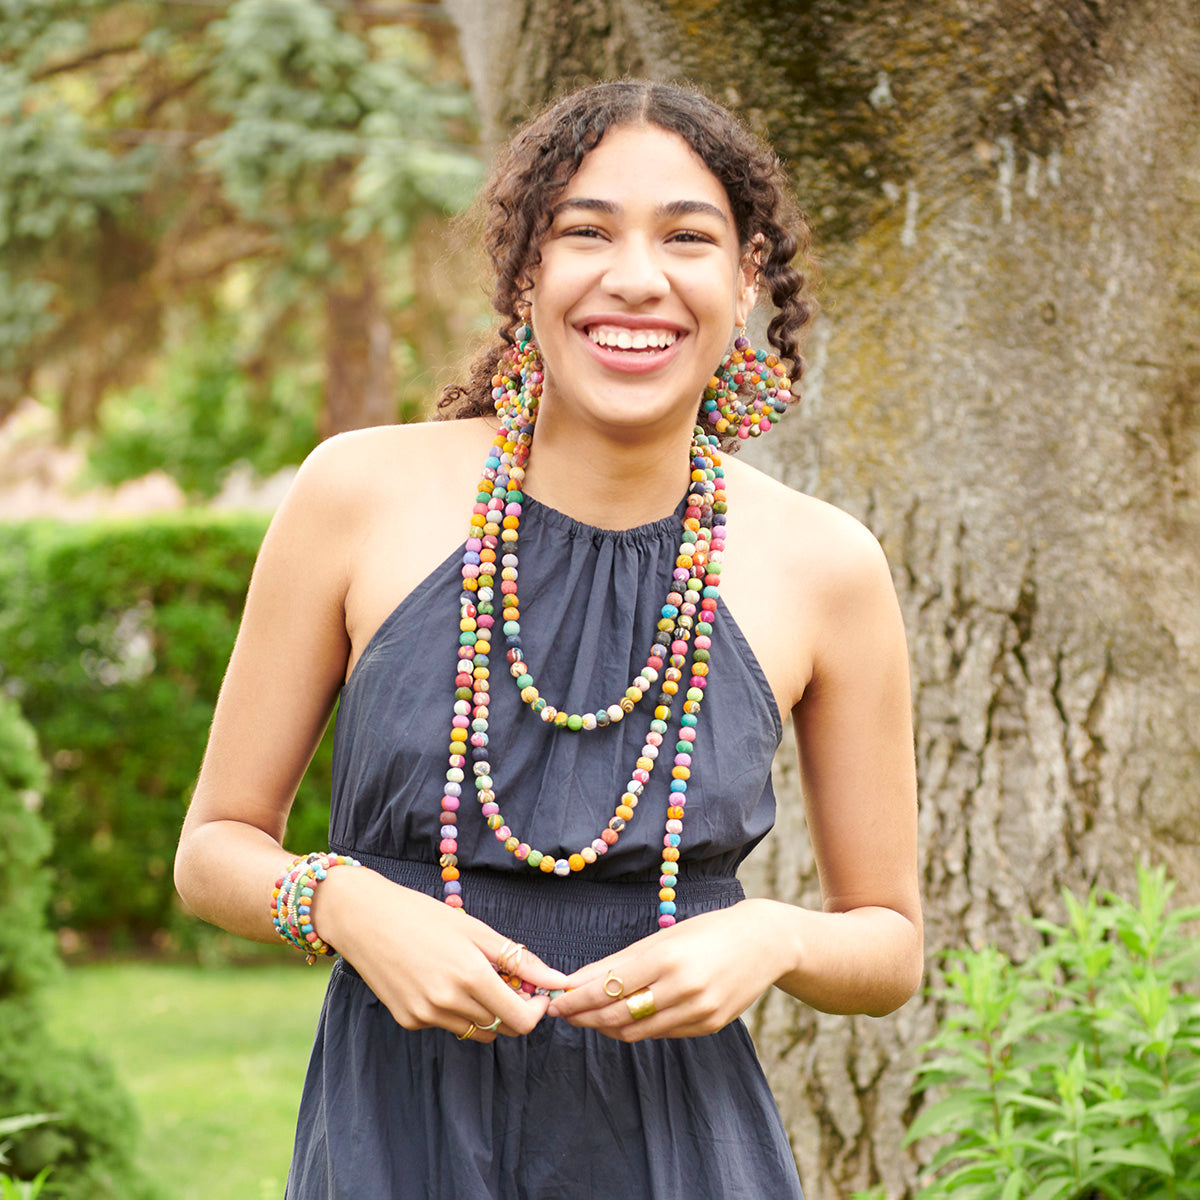 Angelco Accessories single strand kantha short necklace as worn by model, layered with other necklaces